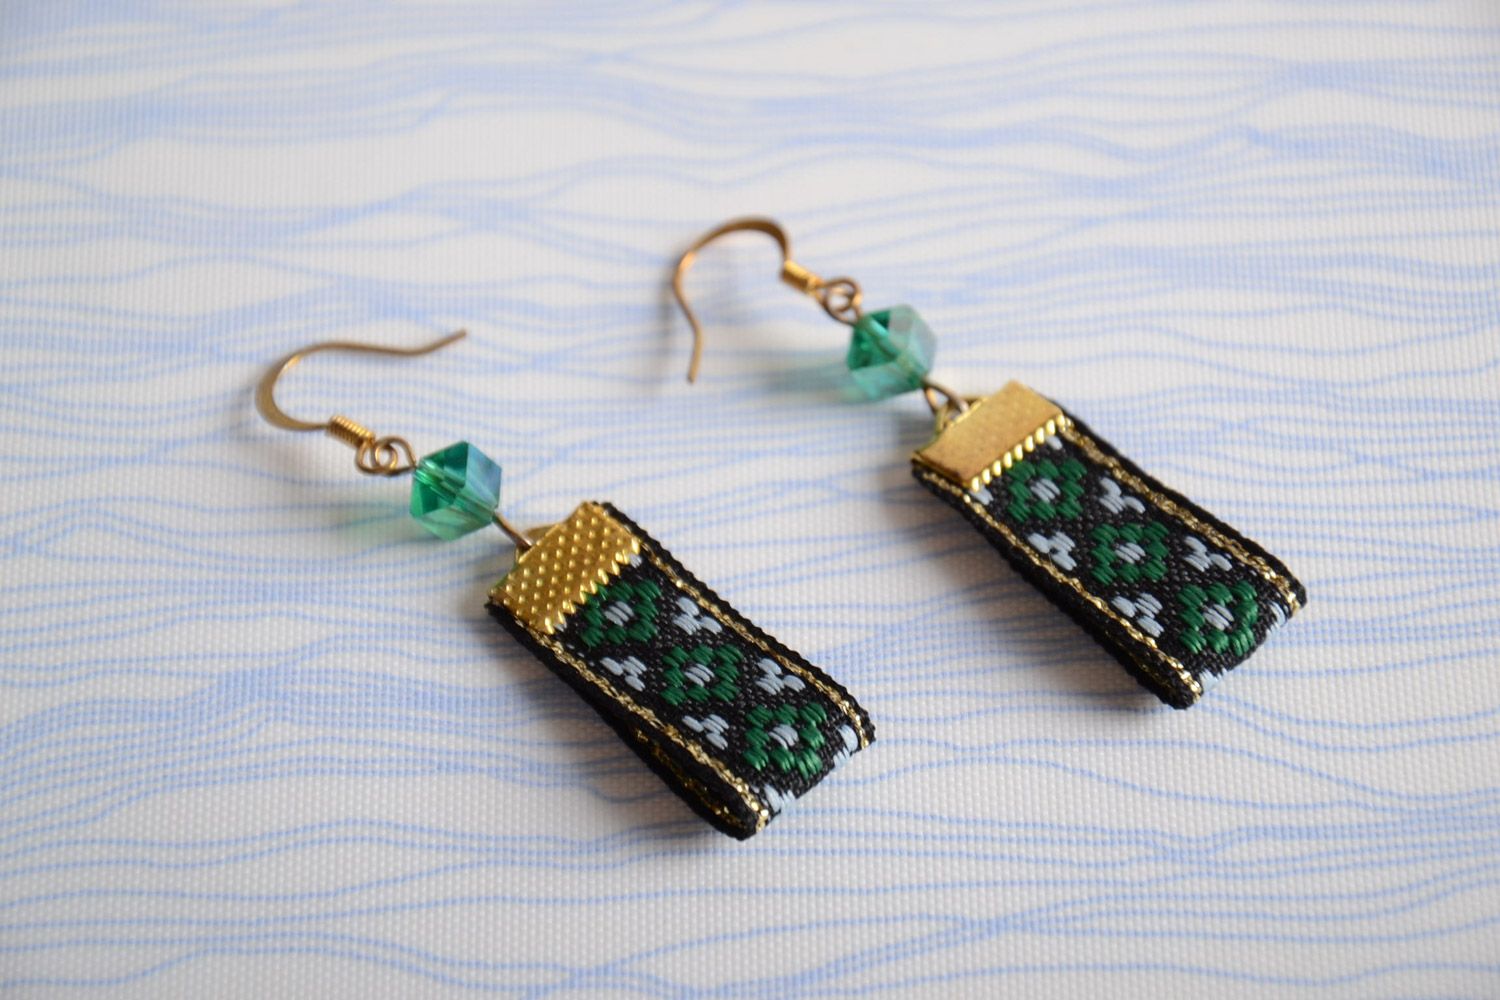 Handmade green earrings in ethnic style made of lace photo 1